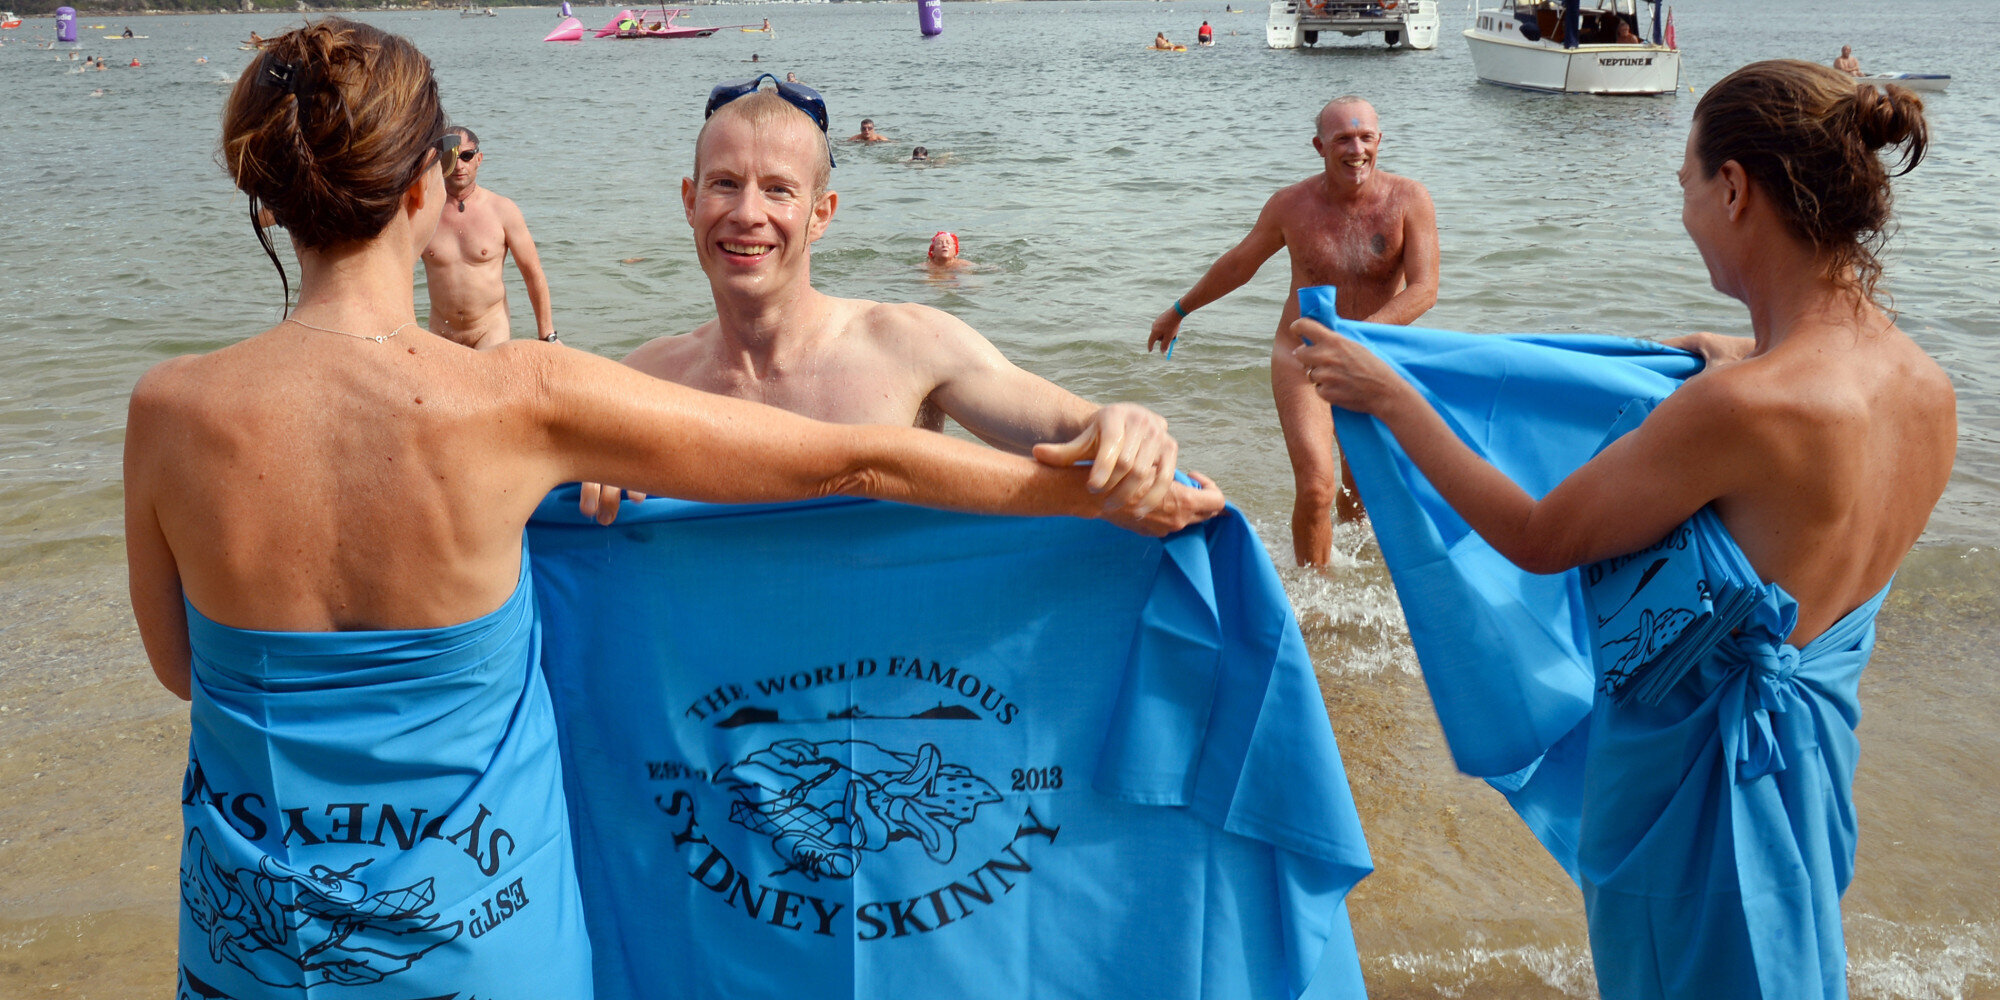 Sydney Skinny, Classy Nude Swim, Takes Place In Australia (PICTURES) HuffPost UK News